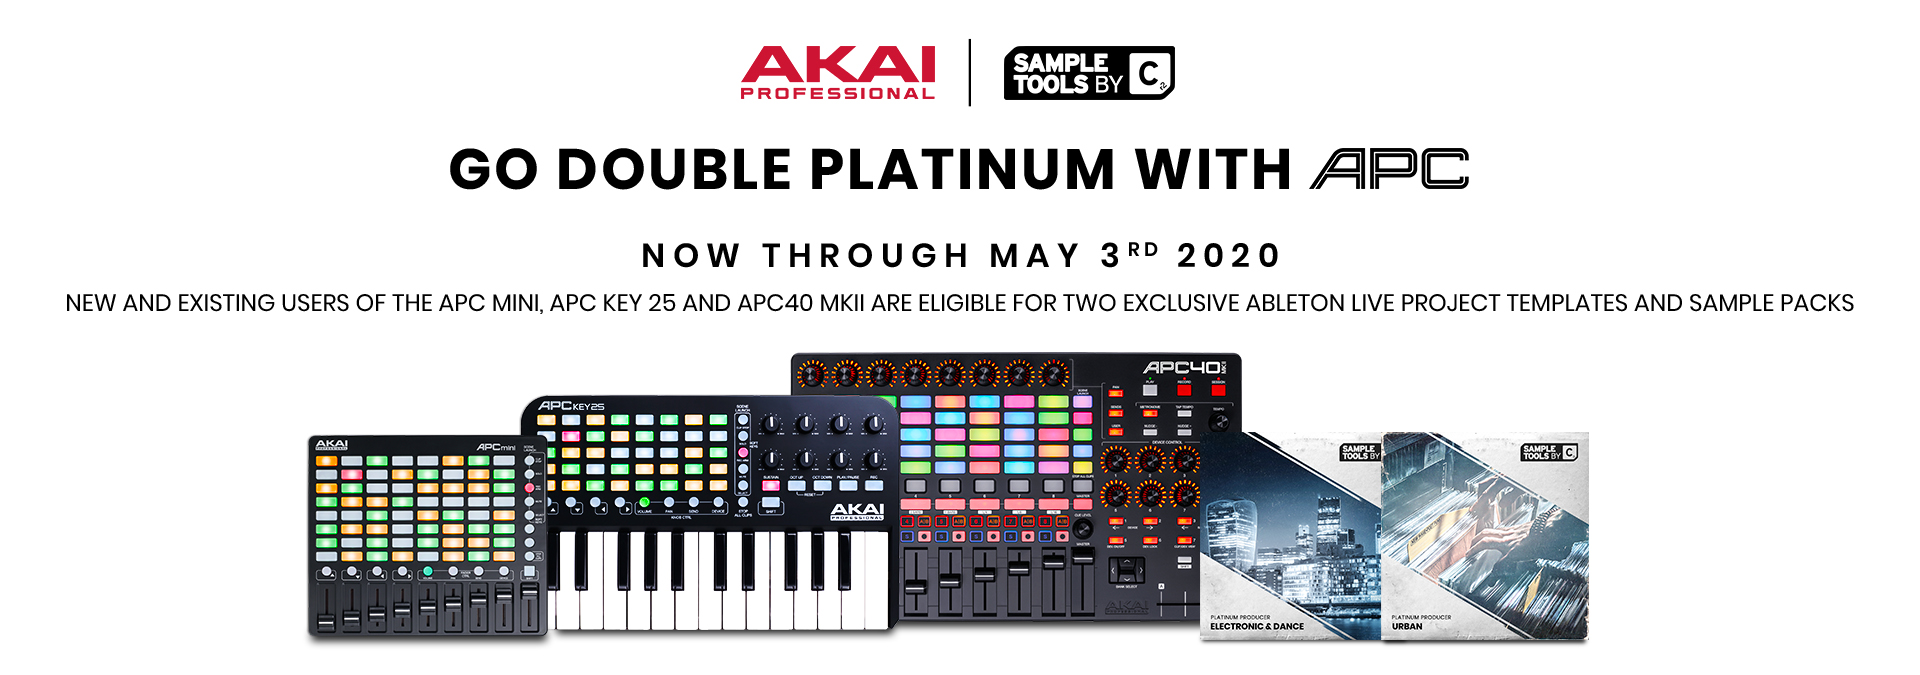 AKAI PROFESSIONAL AND SAMPLE TOOLS BY CR2 ANNOUNCE A LIMITED-TIME 